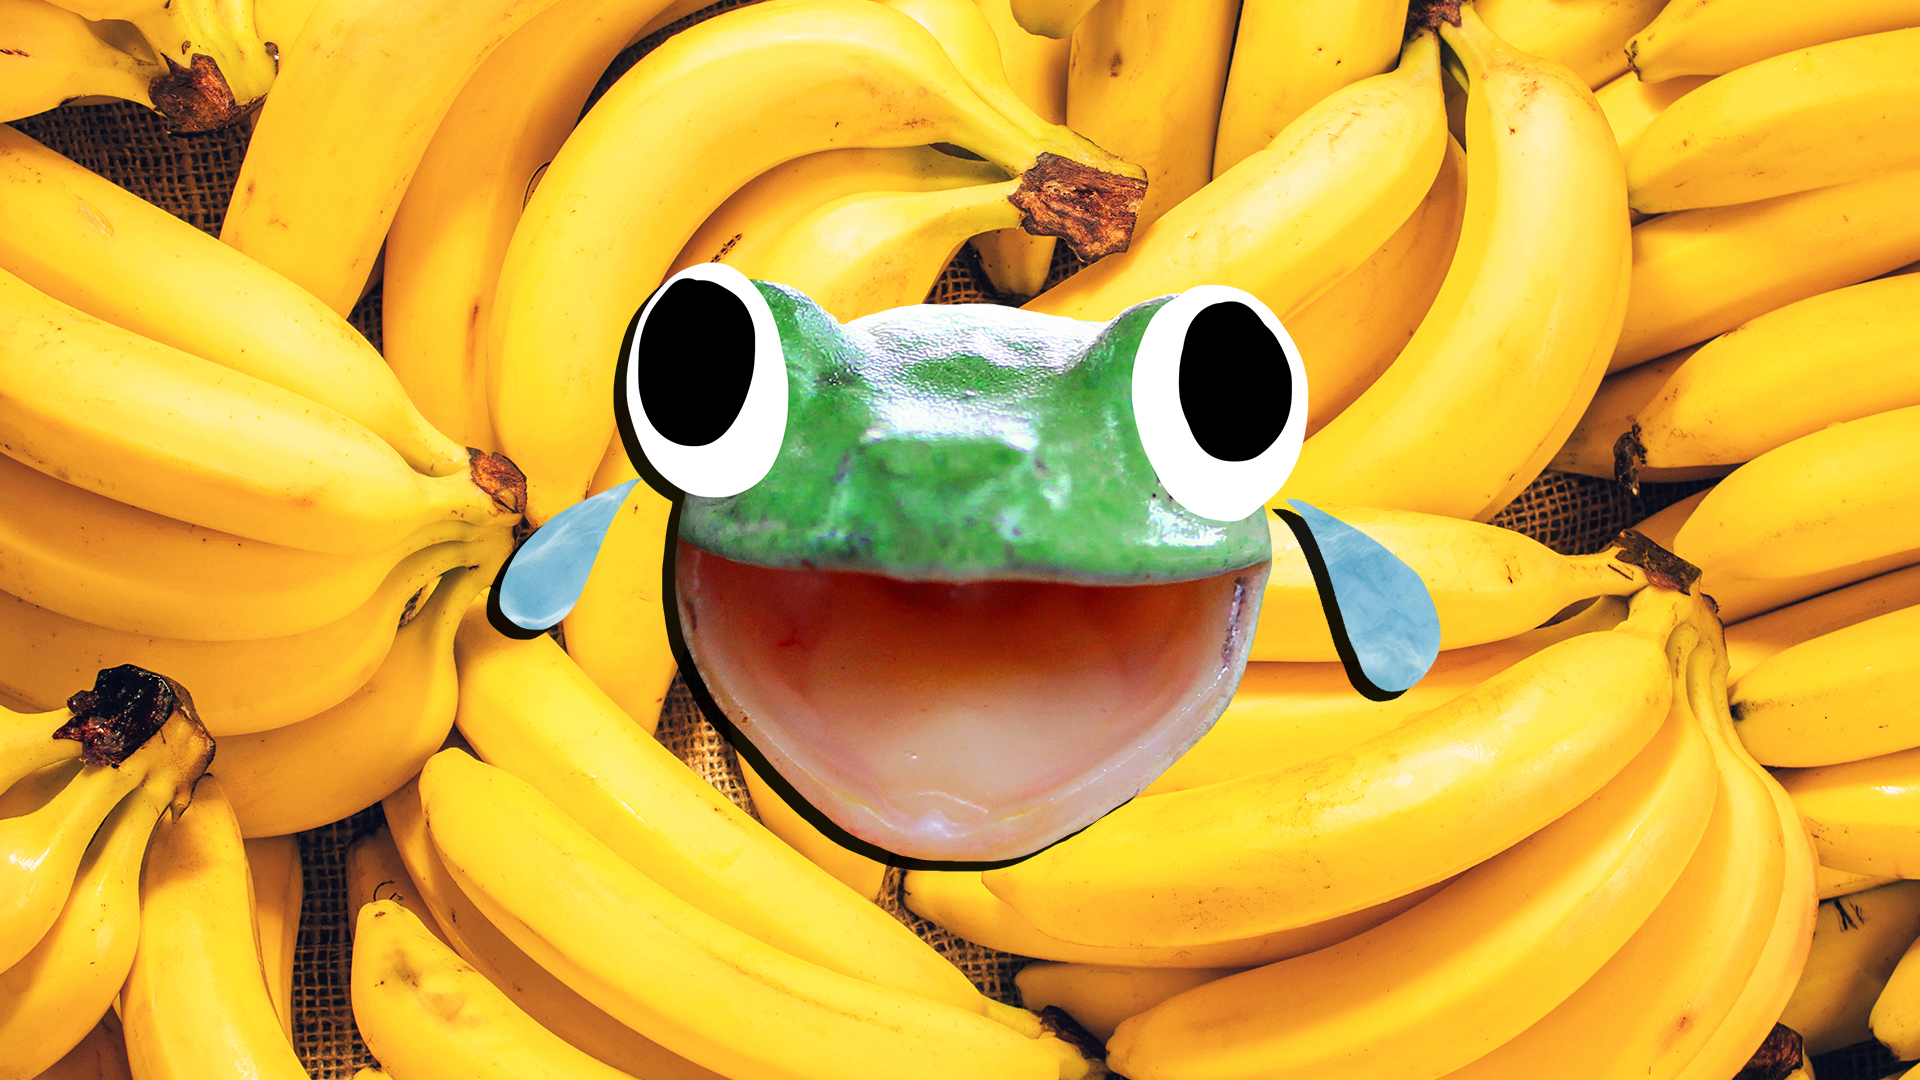 A laughing green frog in front of lots of bananas